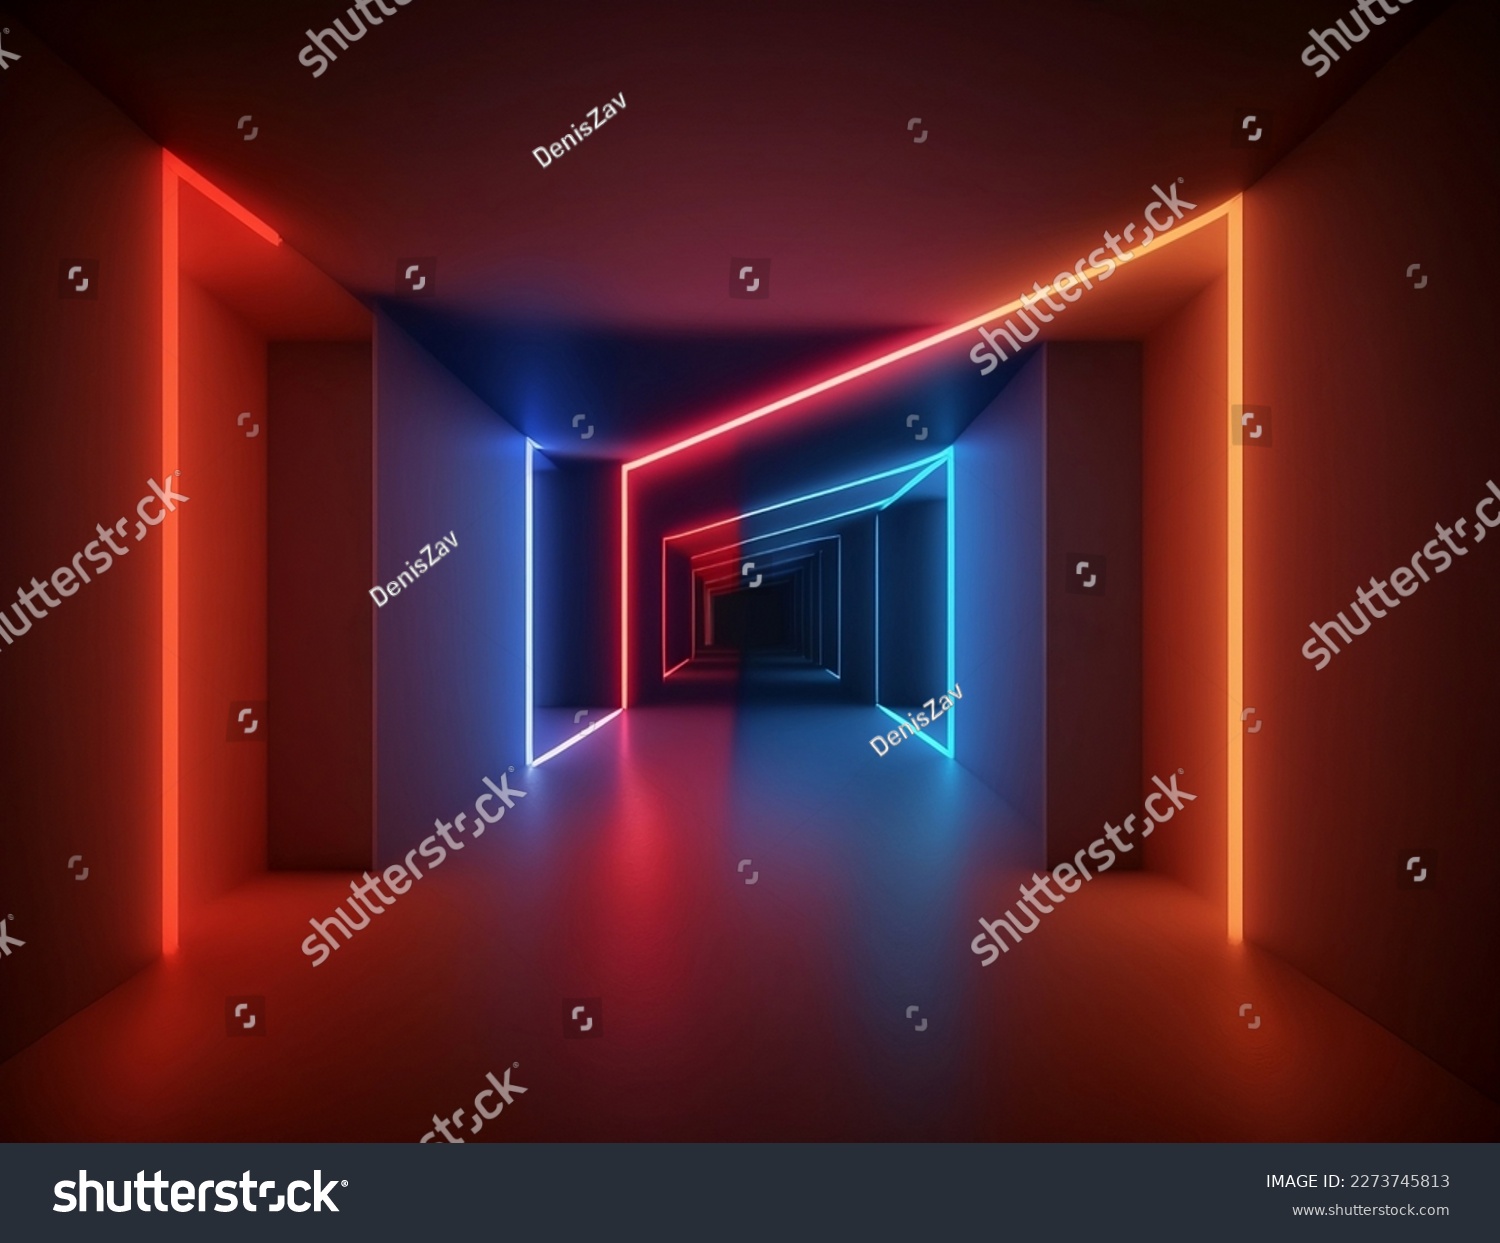 3d rendering, glowing lines, neon lights, abstract psychedelic background, ultraviolet, vibrant colors High quality photo #2273745813